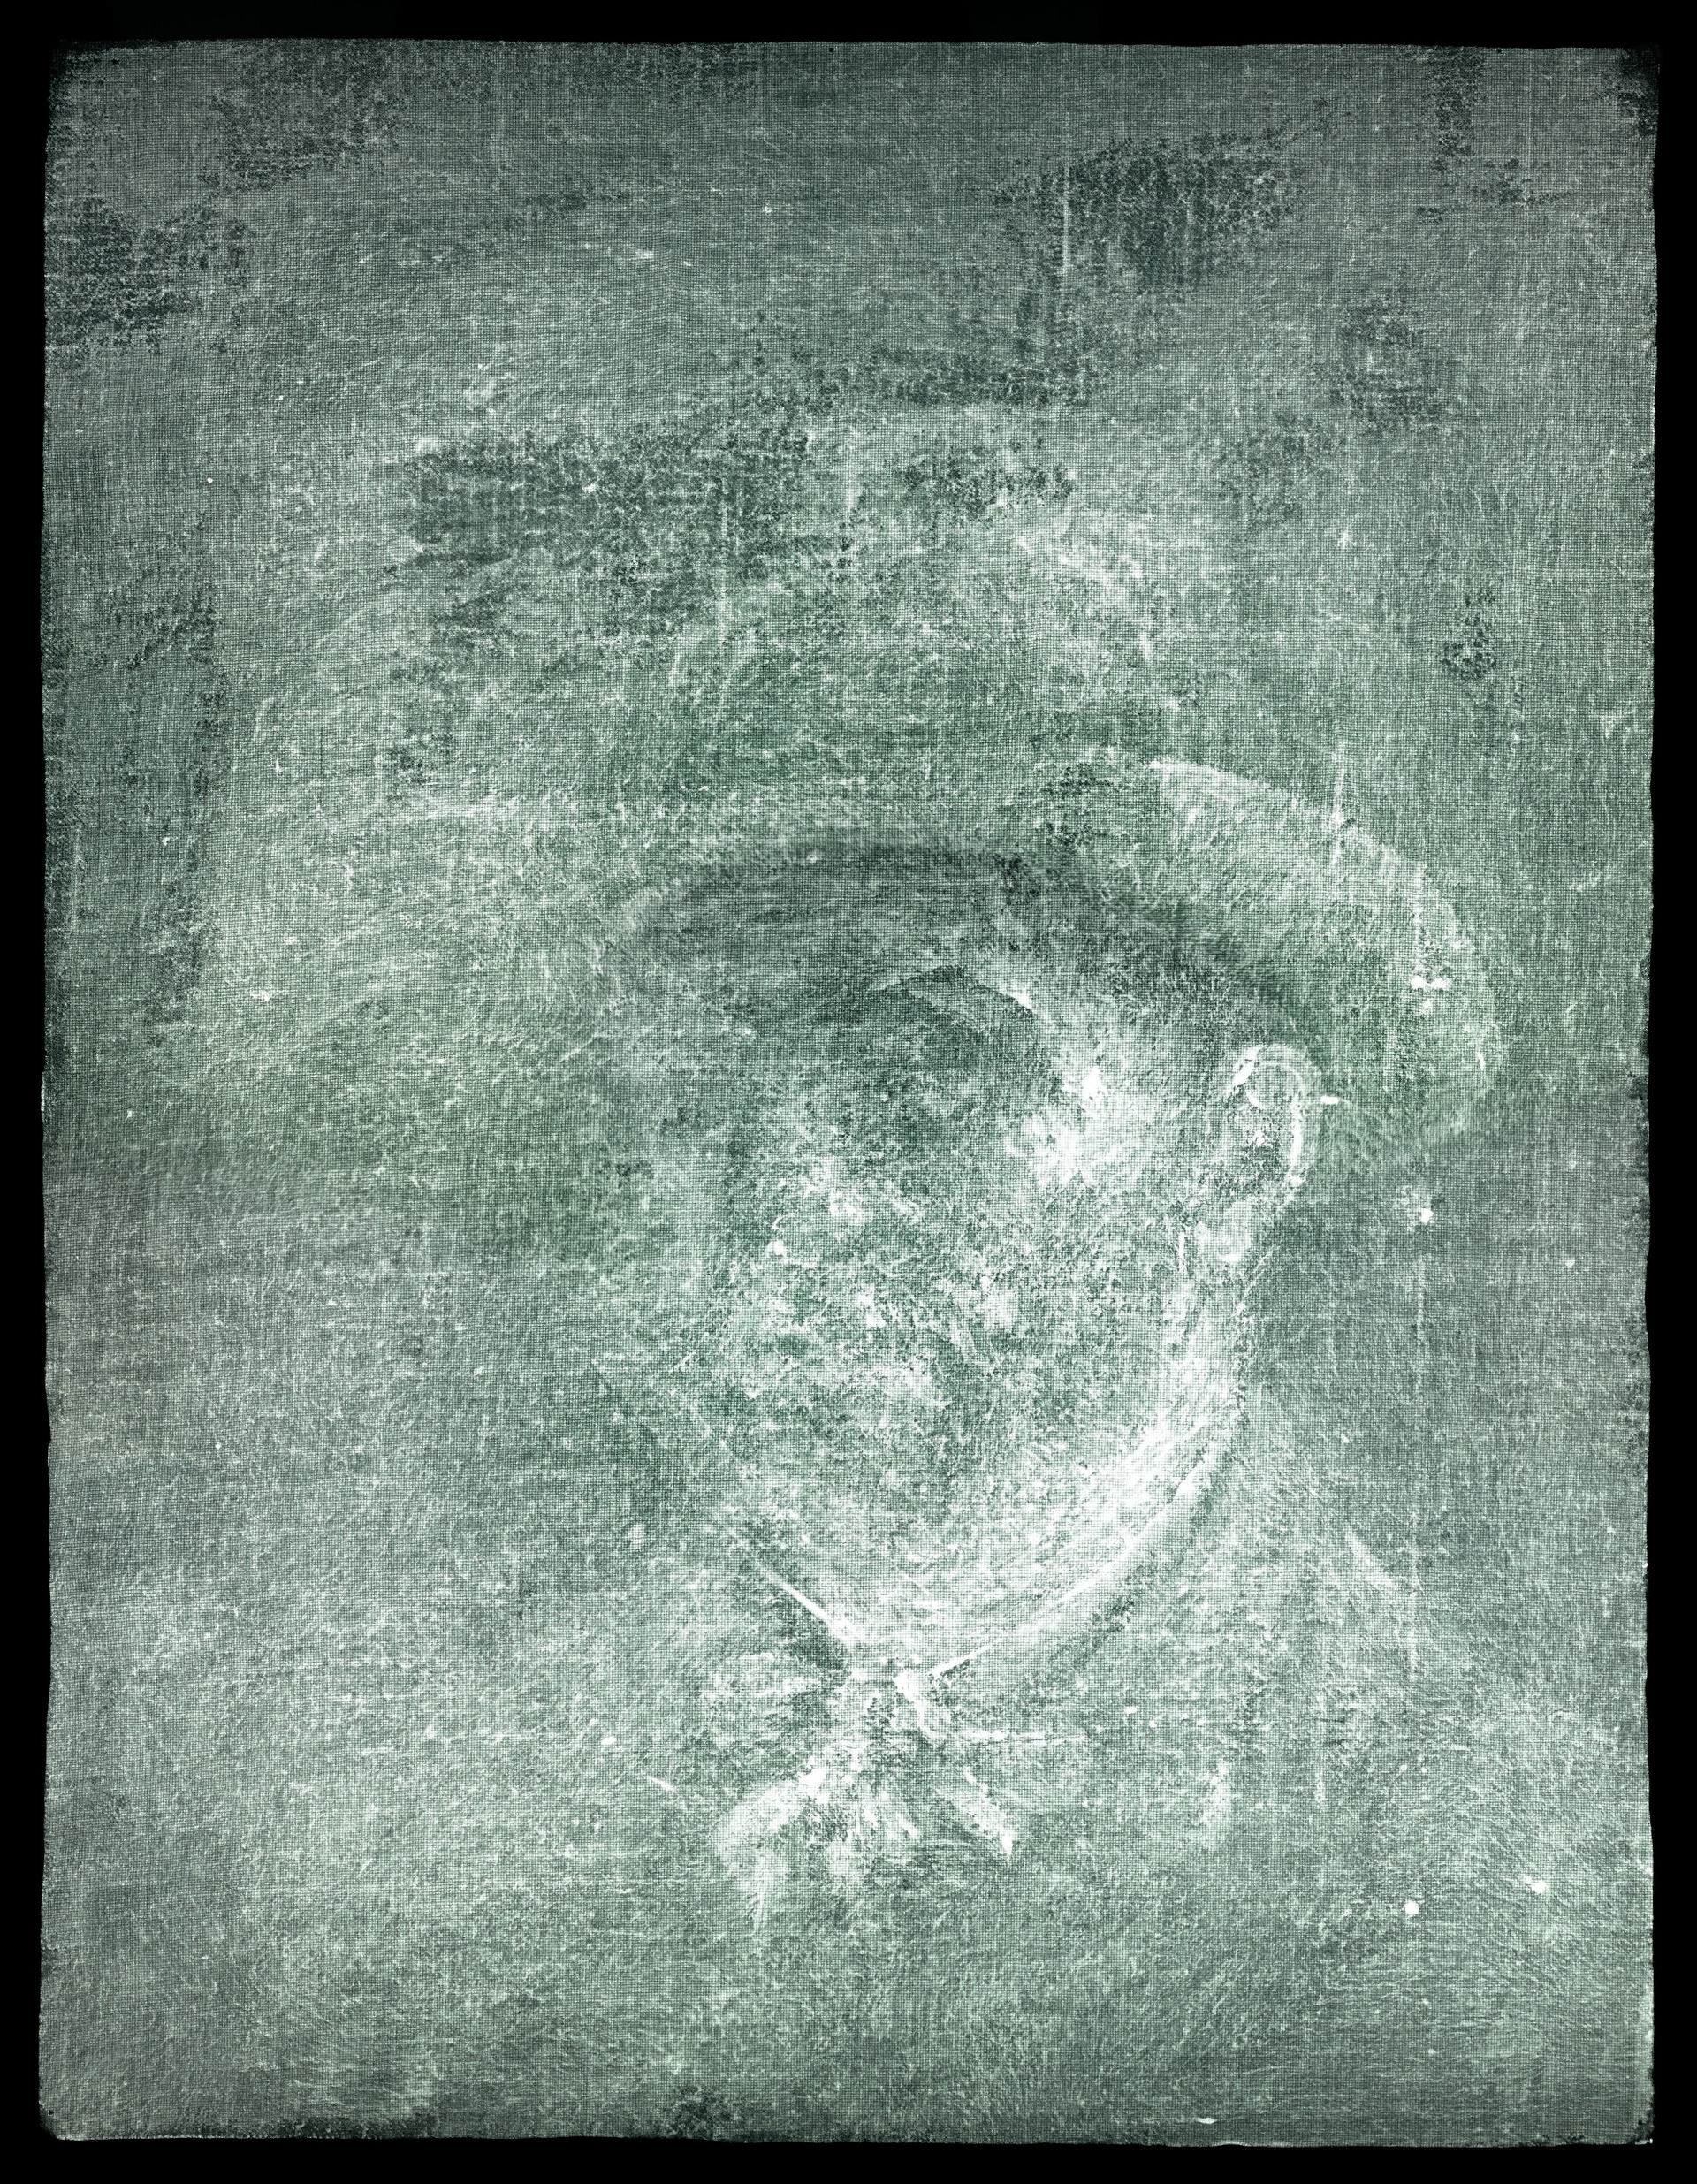 X-ray image of Van Gogh self-portrait (Pic: National Galleries of Scotland)